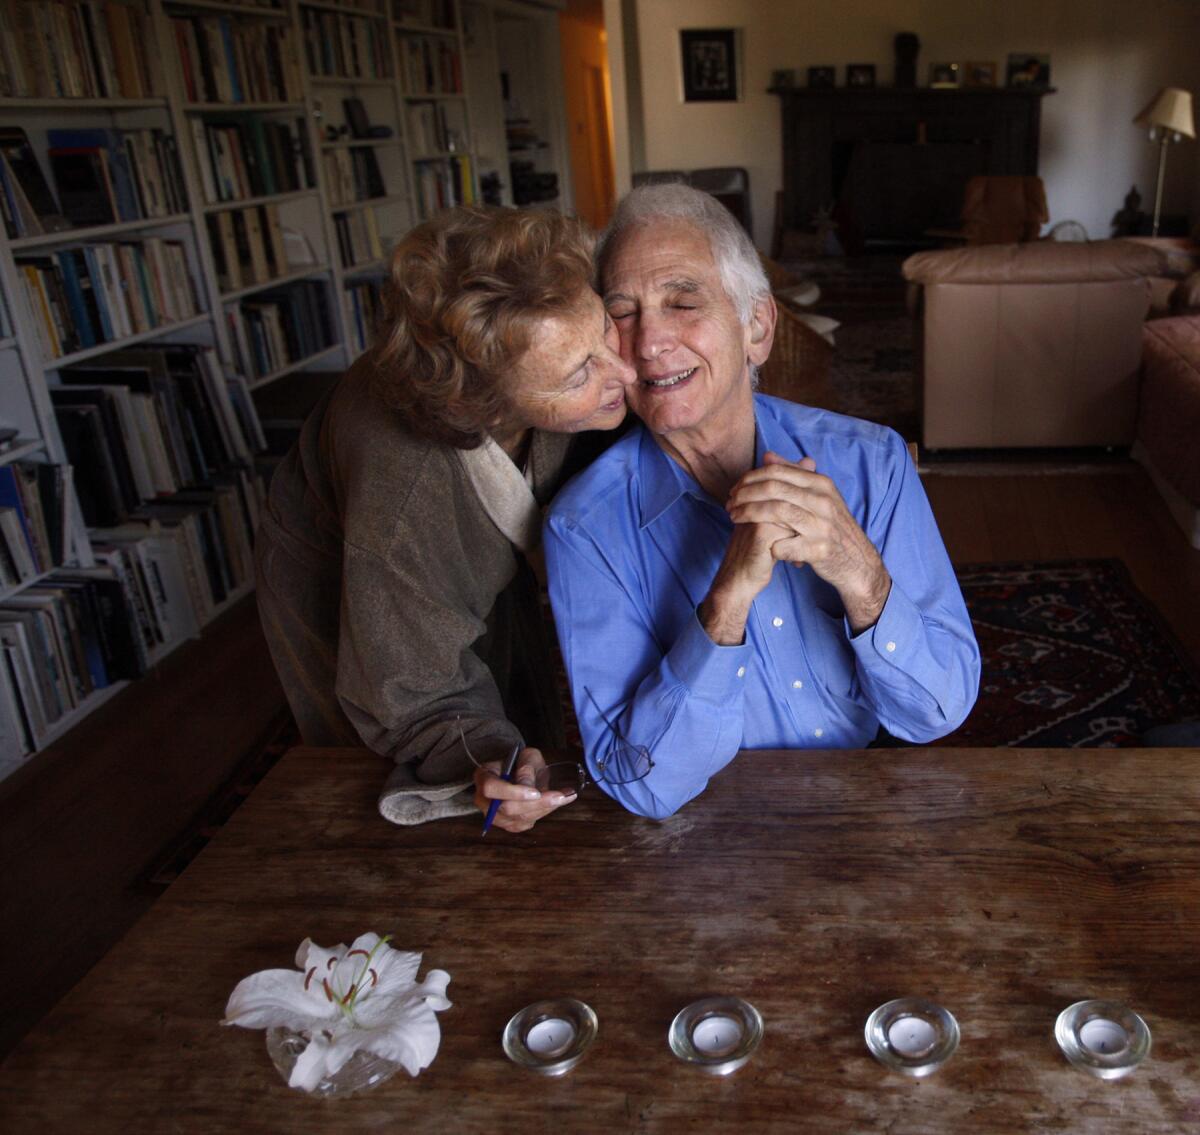 Daniel Ellsberg, the whistleblower who released the Pentagon Papers, receives a